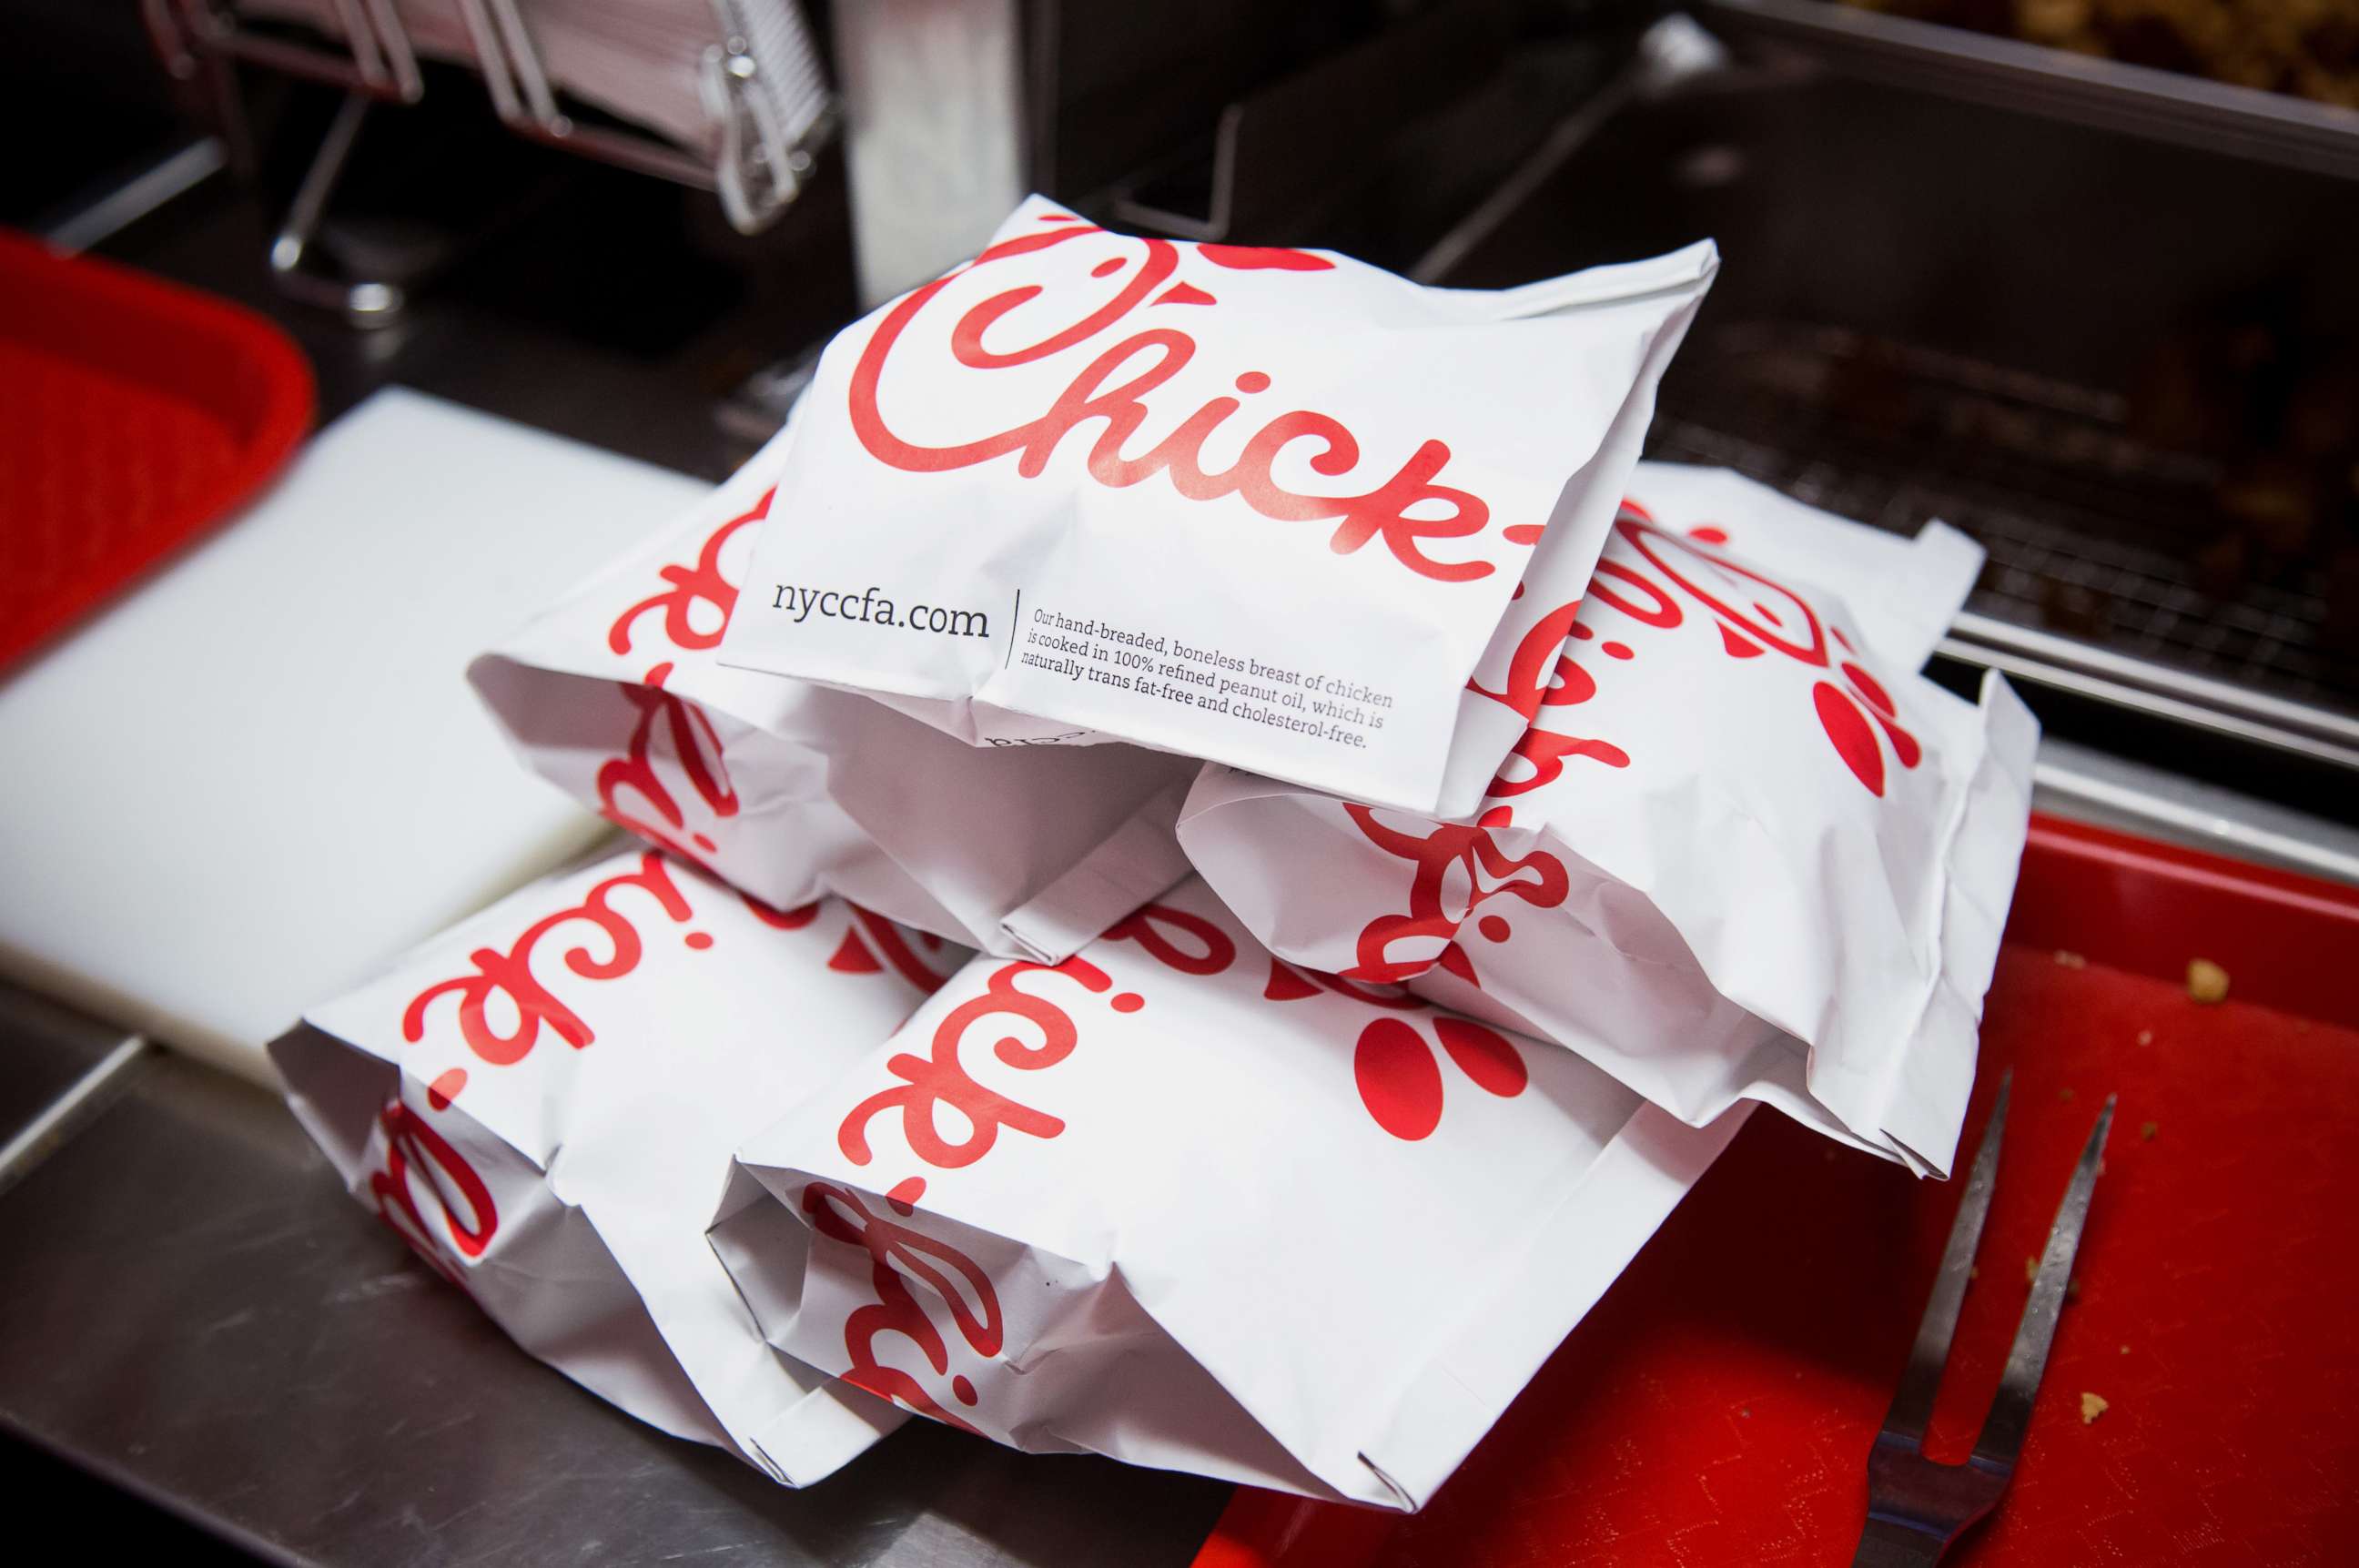 PHOTO: Prepared chicken sandwiches sit in a piie before being served to guests during an event ahead of the grand opening for a Chick-fil-A restaurant in New York, Oct. 2, 2015.